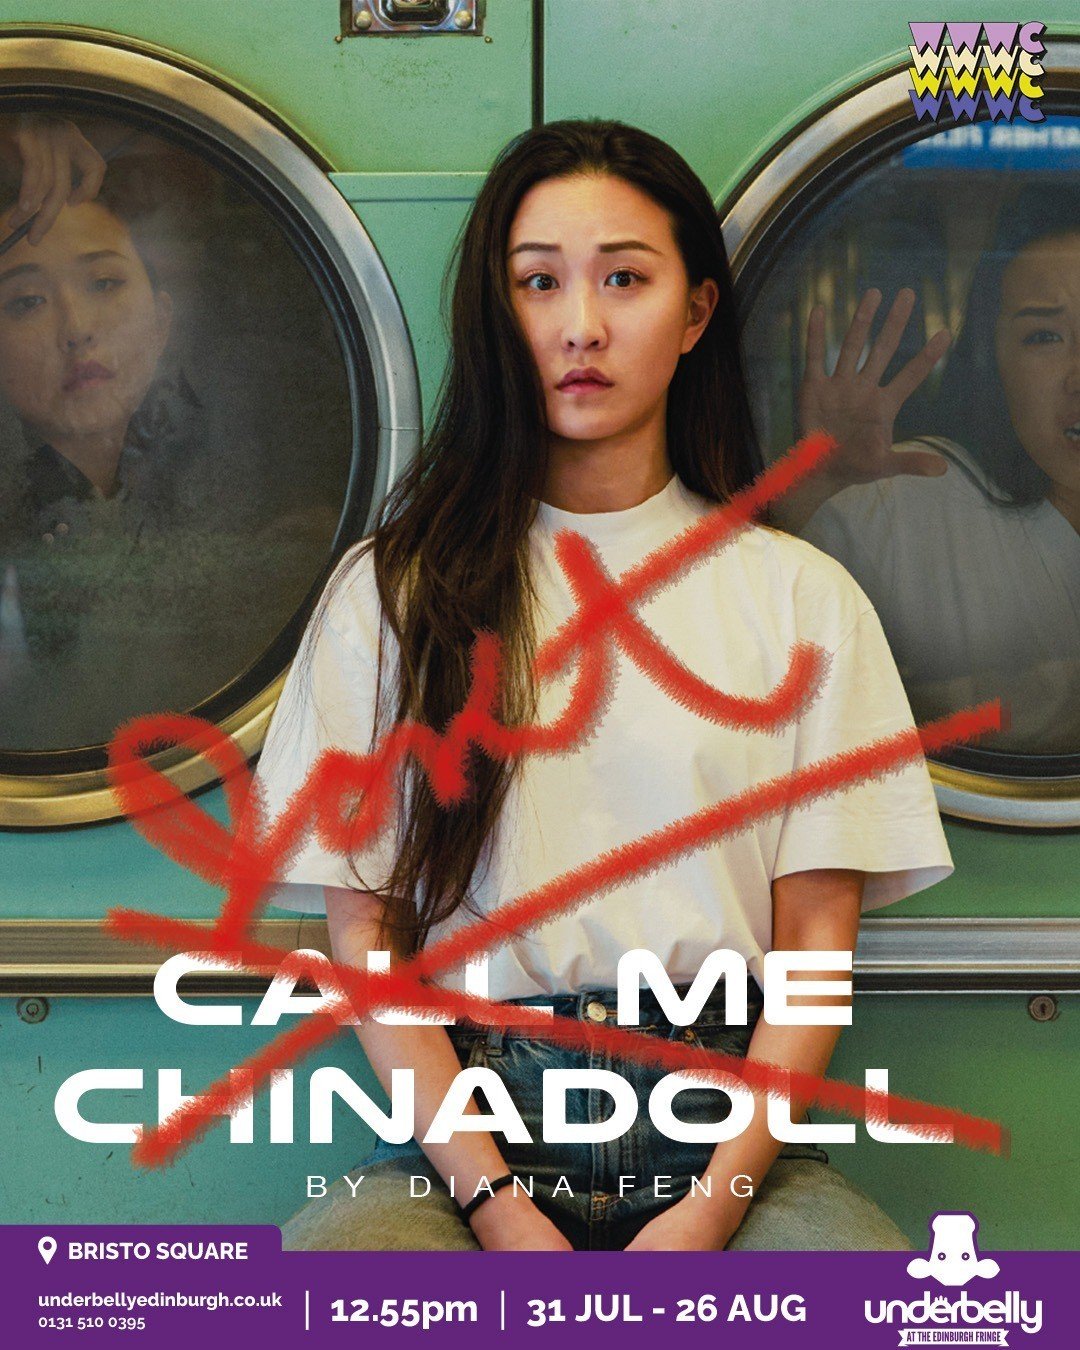 🎟️ Tickets are NOW ON SALE for Don't Call Me China Doll!⁠
⁠
📍 Underbelly Bristo Square (EH8 9AG)⁠
🗓️ 31 July-26 August @ 12:55pm⁠
💸 Tickets from &pound;7⁠
⁠
Available now on the @underbellyedinburgh website!⁠
⁠
As she prepares for the audition of